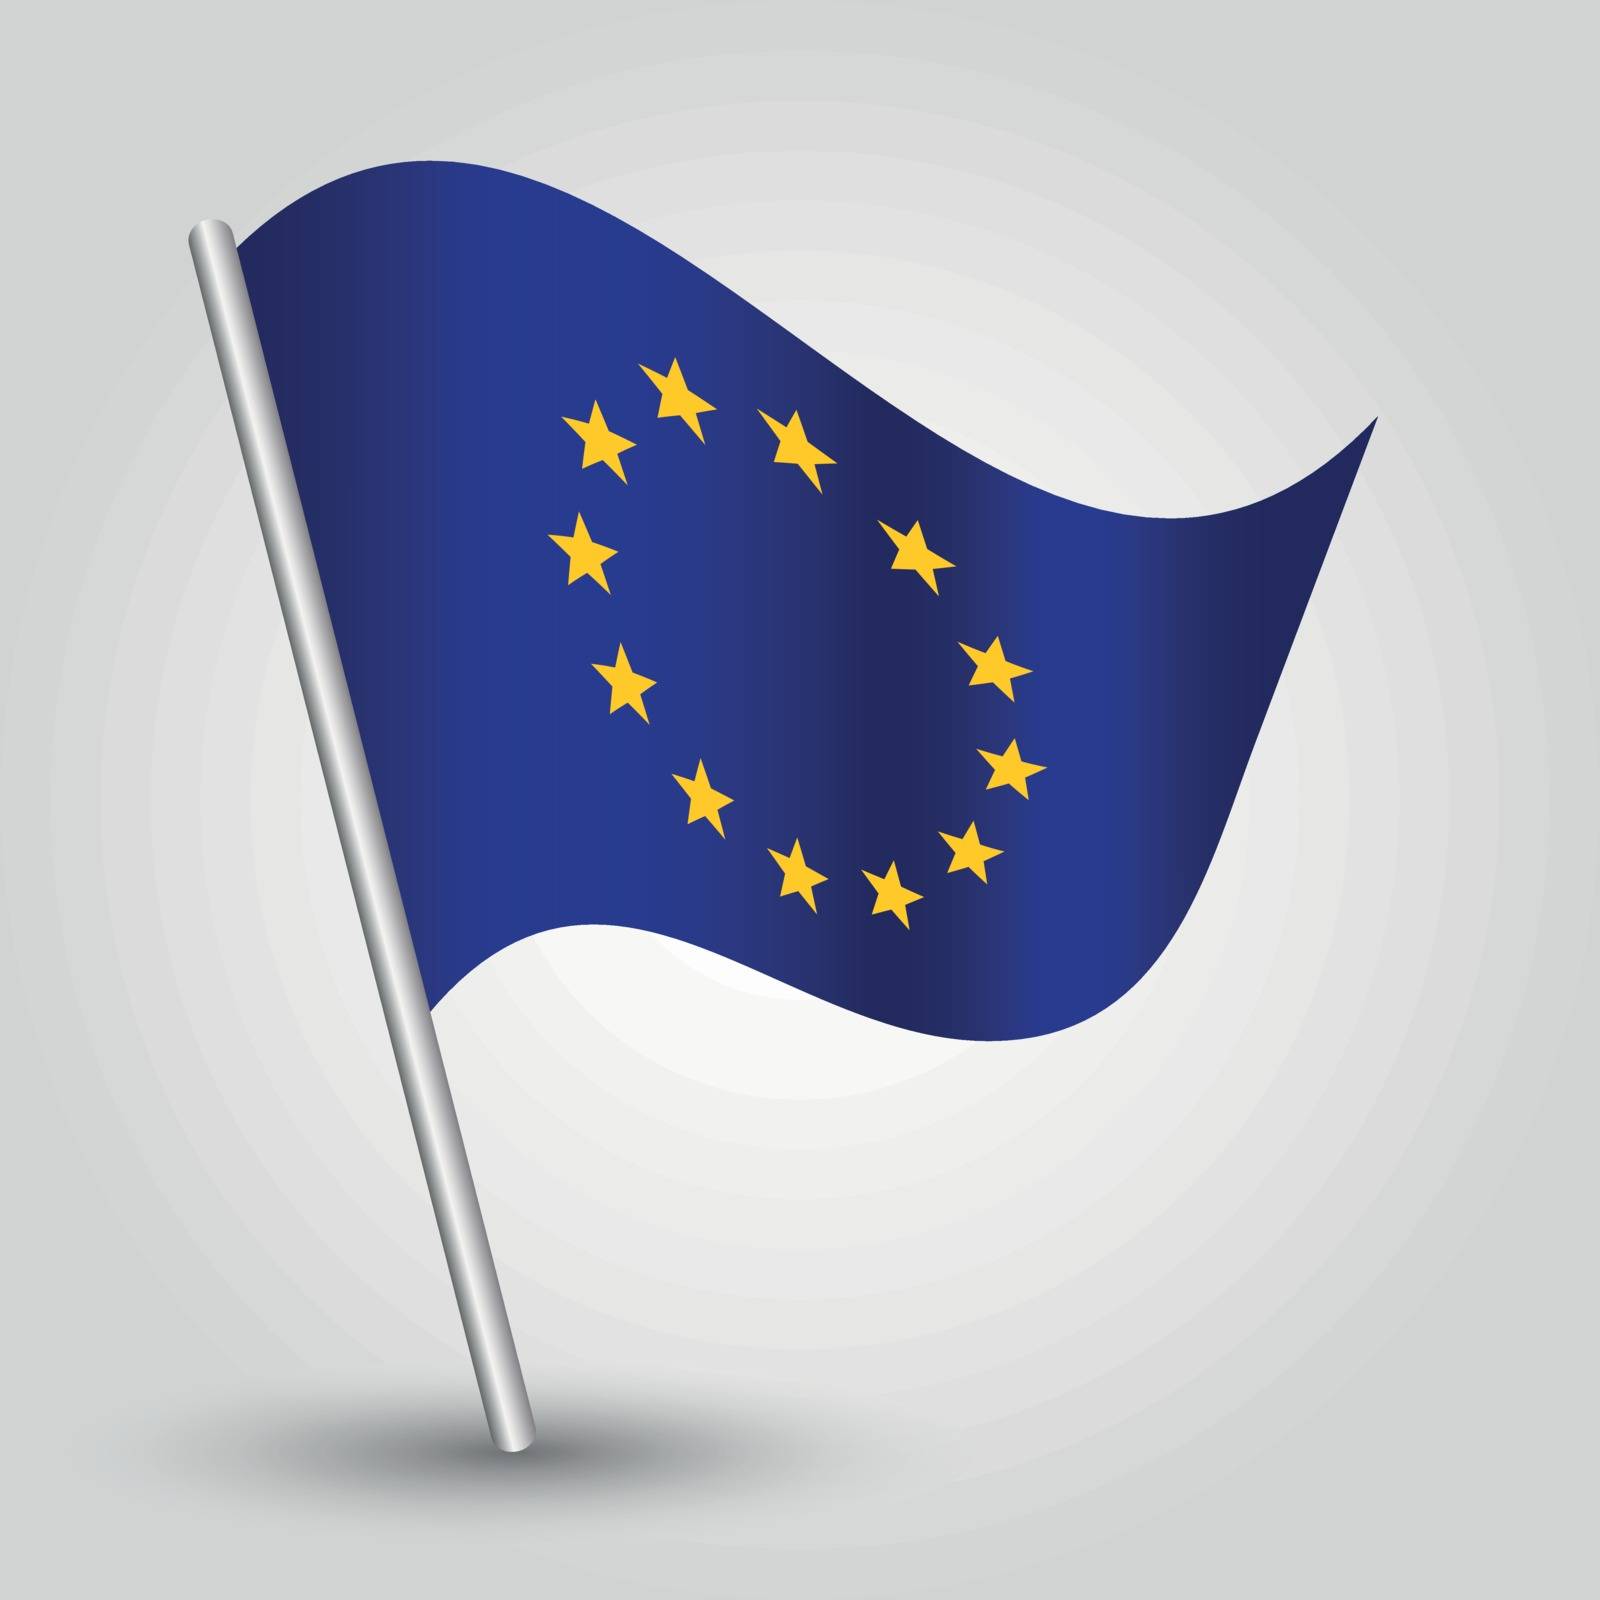 vector 3d waving eu flag on pole - national symbol of european union with inclined metal stick